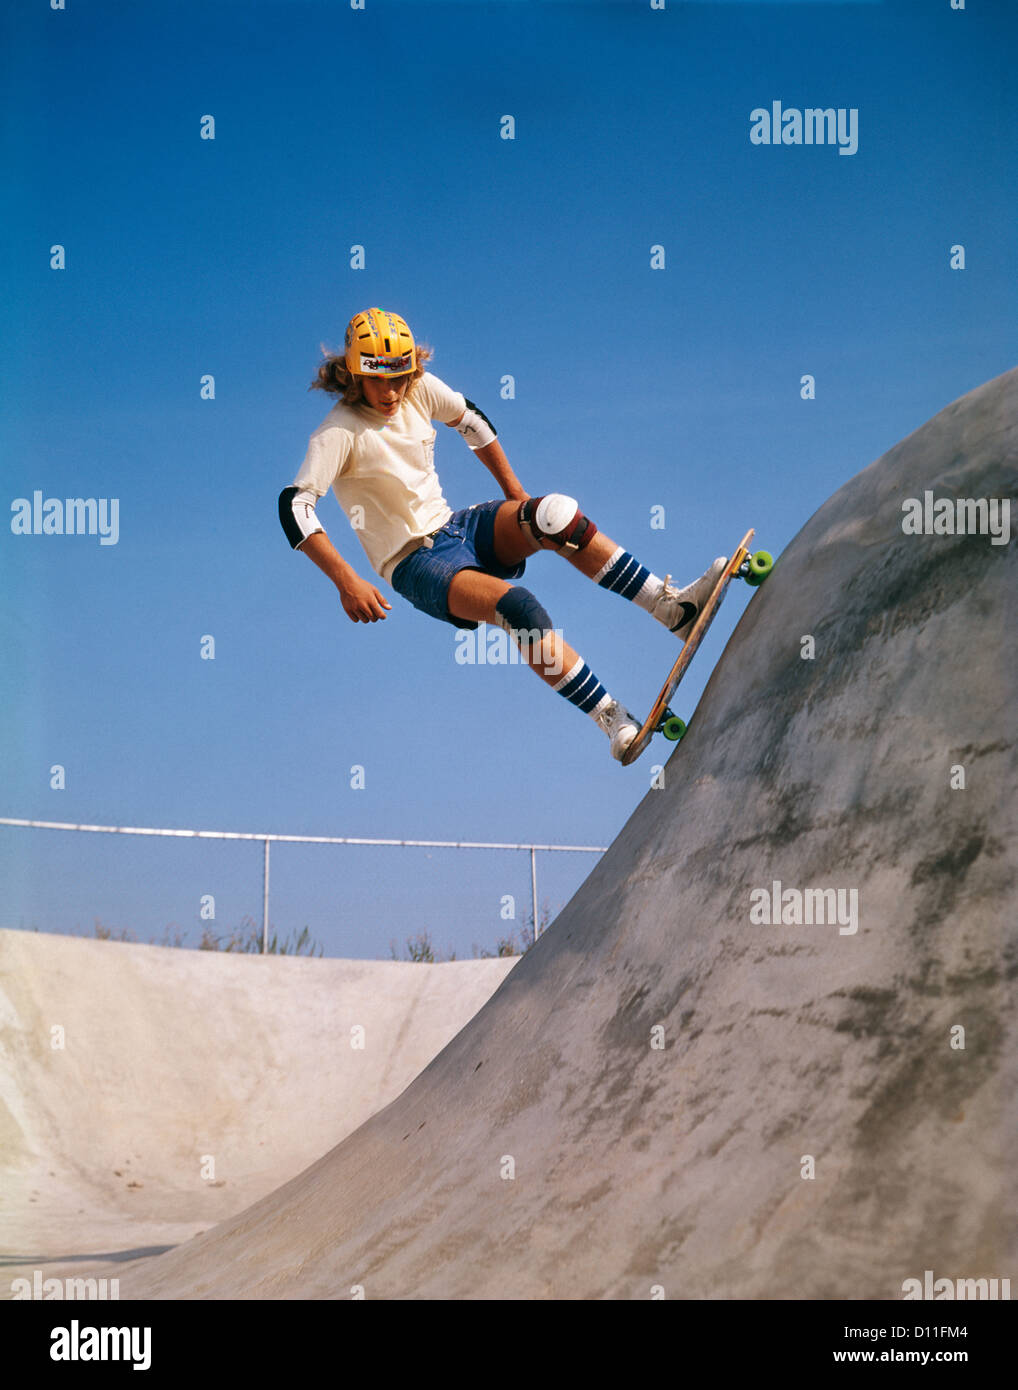 1970s TEENAGE BOY WEARING SAFETY EQUIPMENT SKATE BOARDING ON SKATEBOARD OBSTACLE COURSE Stock Photo